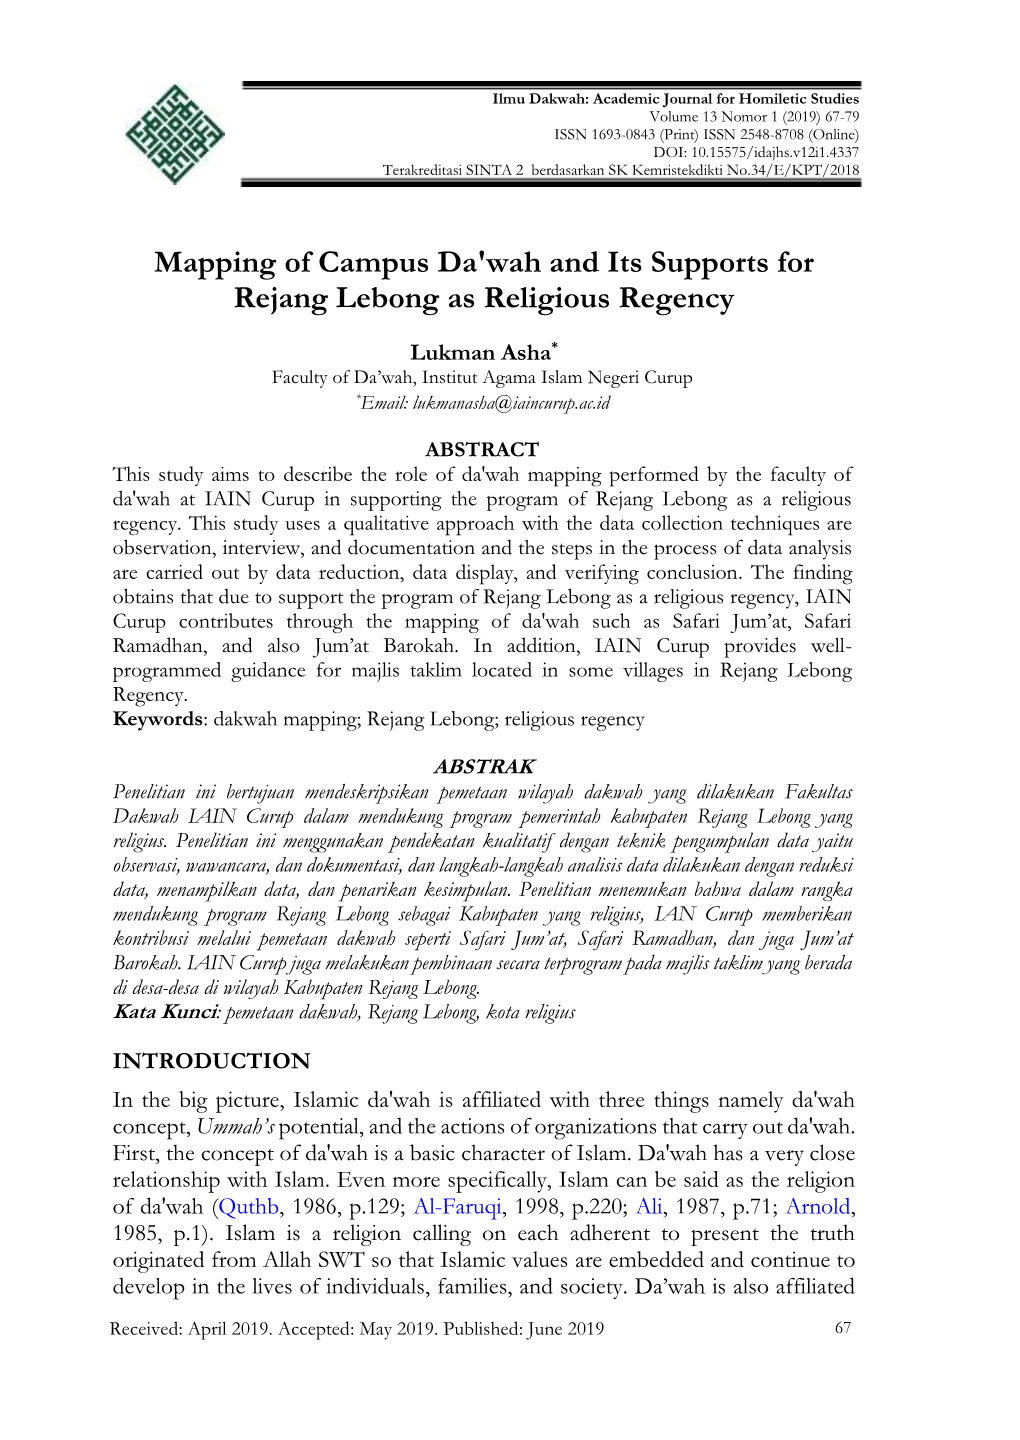 Mapping of Campus Da'wah and Its Supports for Rejang Lebong As Religious Regency